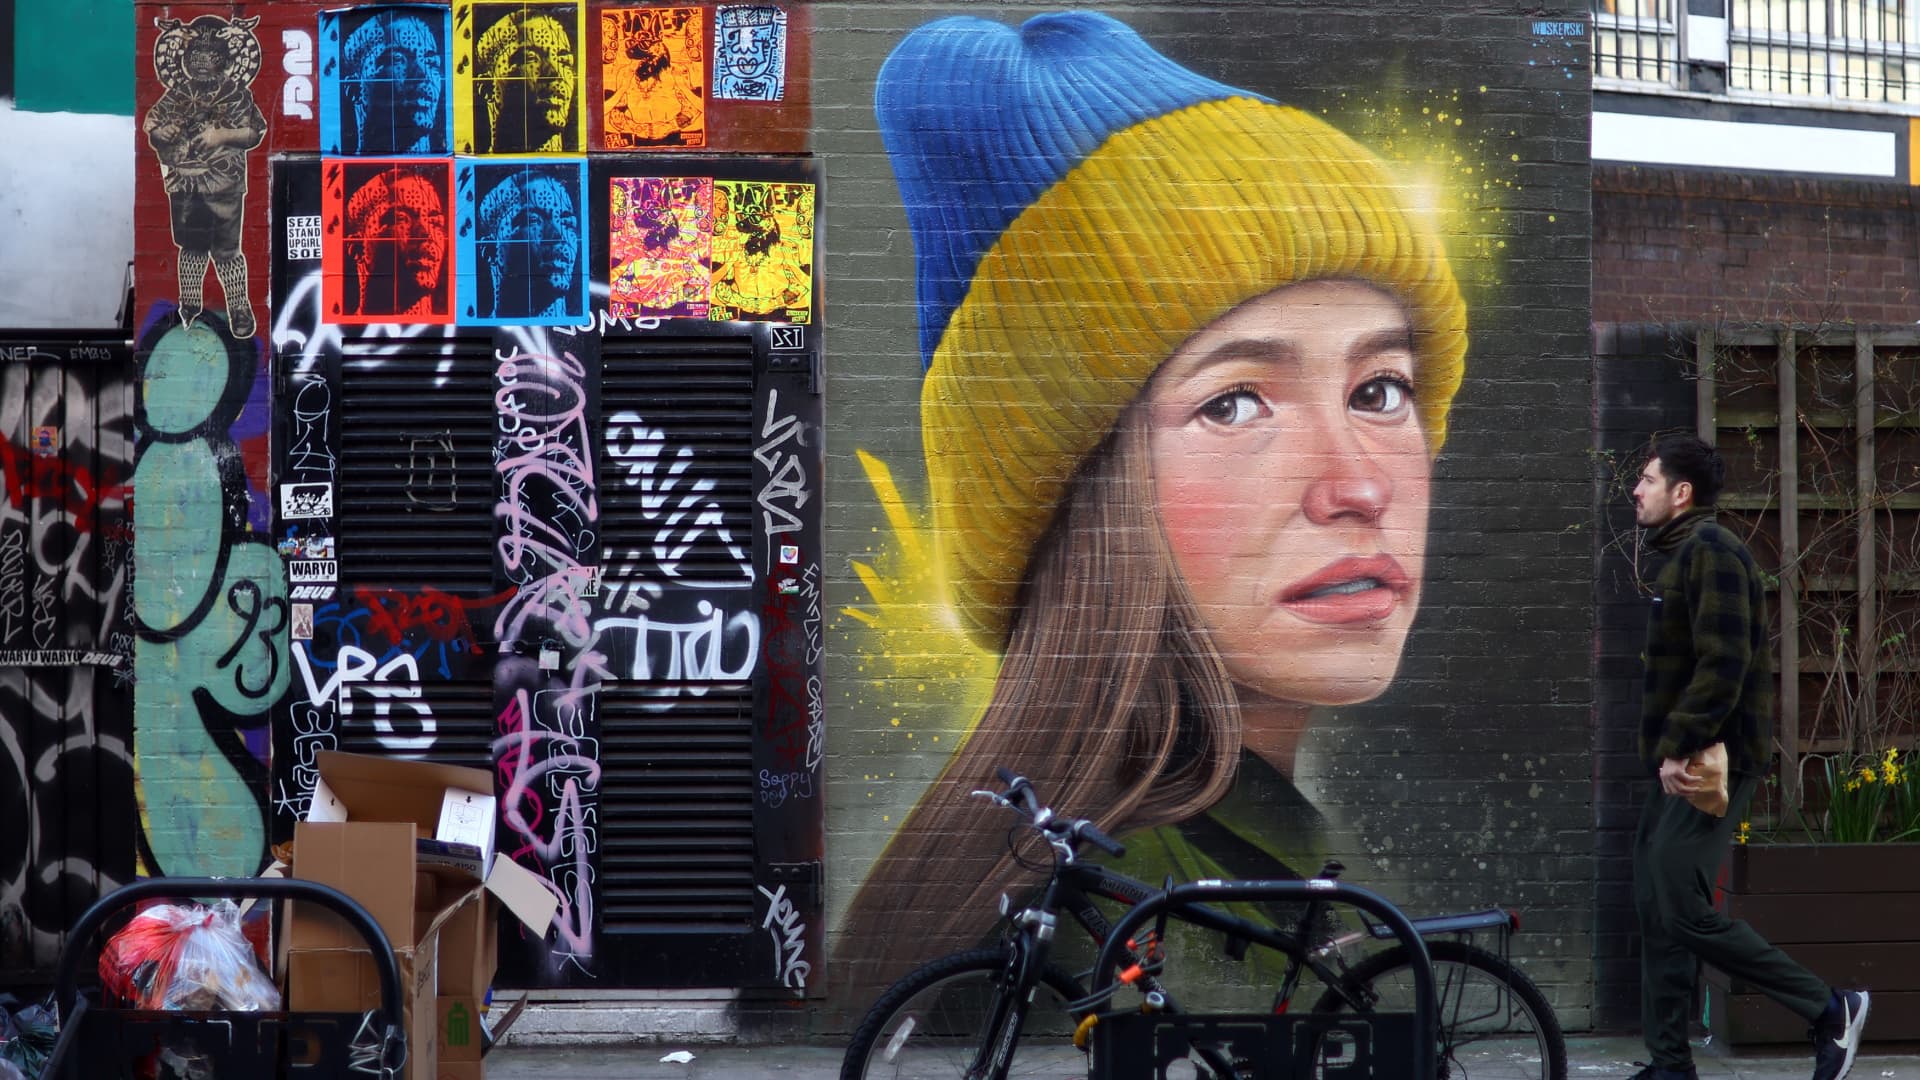 A man walks past a mural in support of Ukraine by artist WOSKerski, as Russia's invasion of Ukraine continues, in London, Britain, March 14, 2022. 